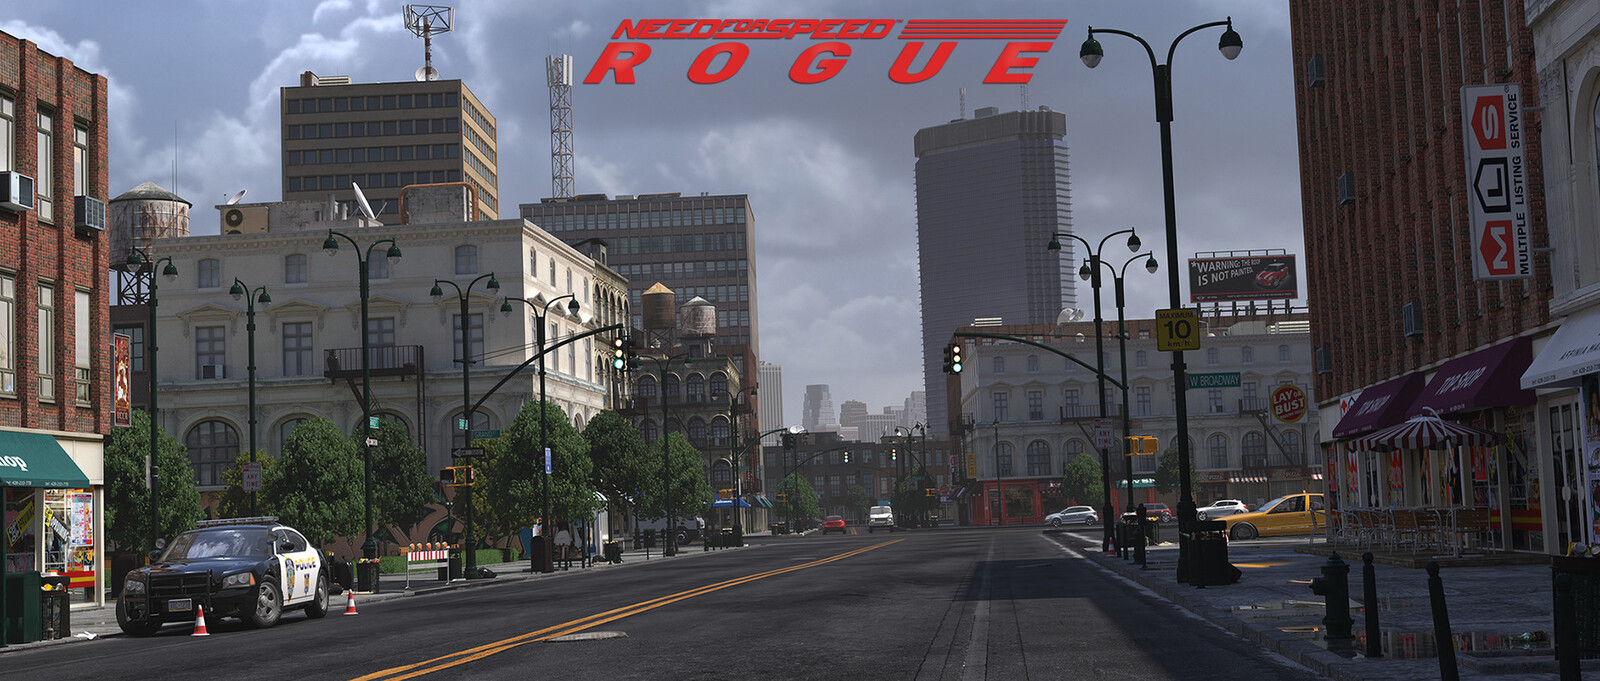 Need for Speed Rogue (Americana-styled city)